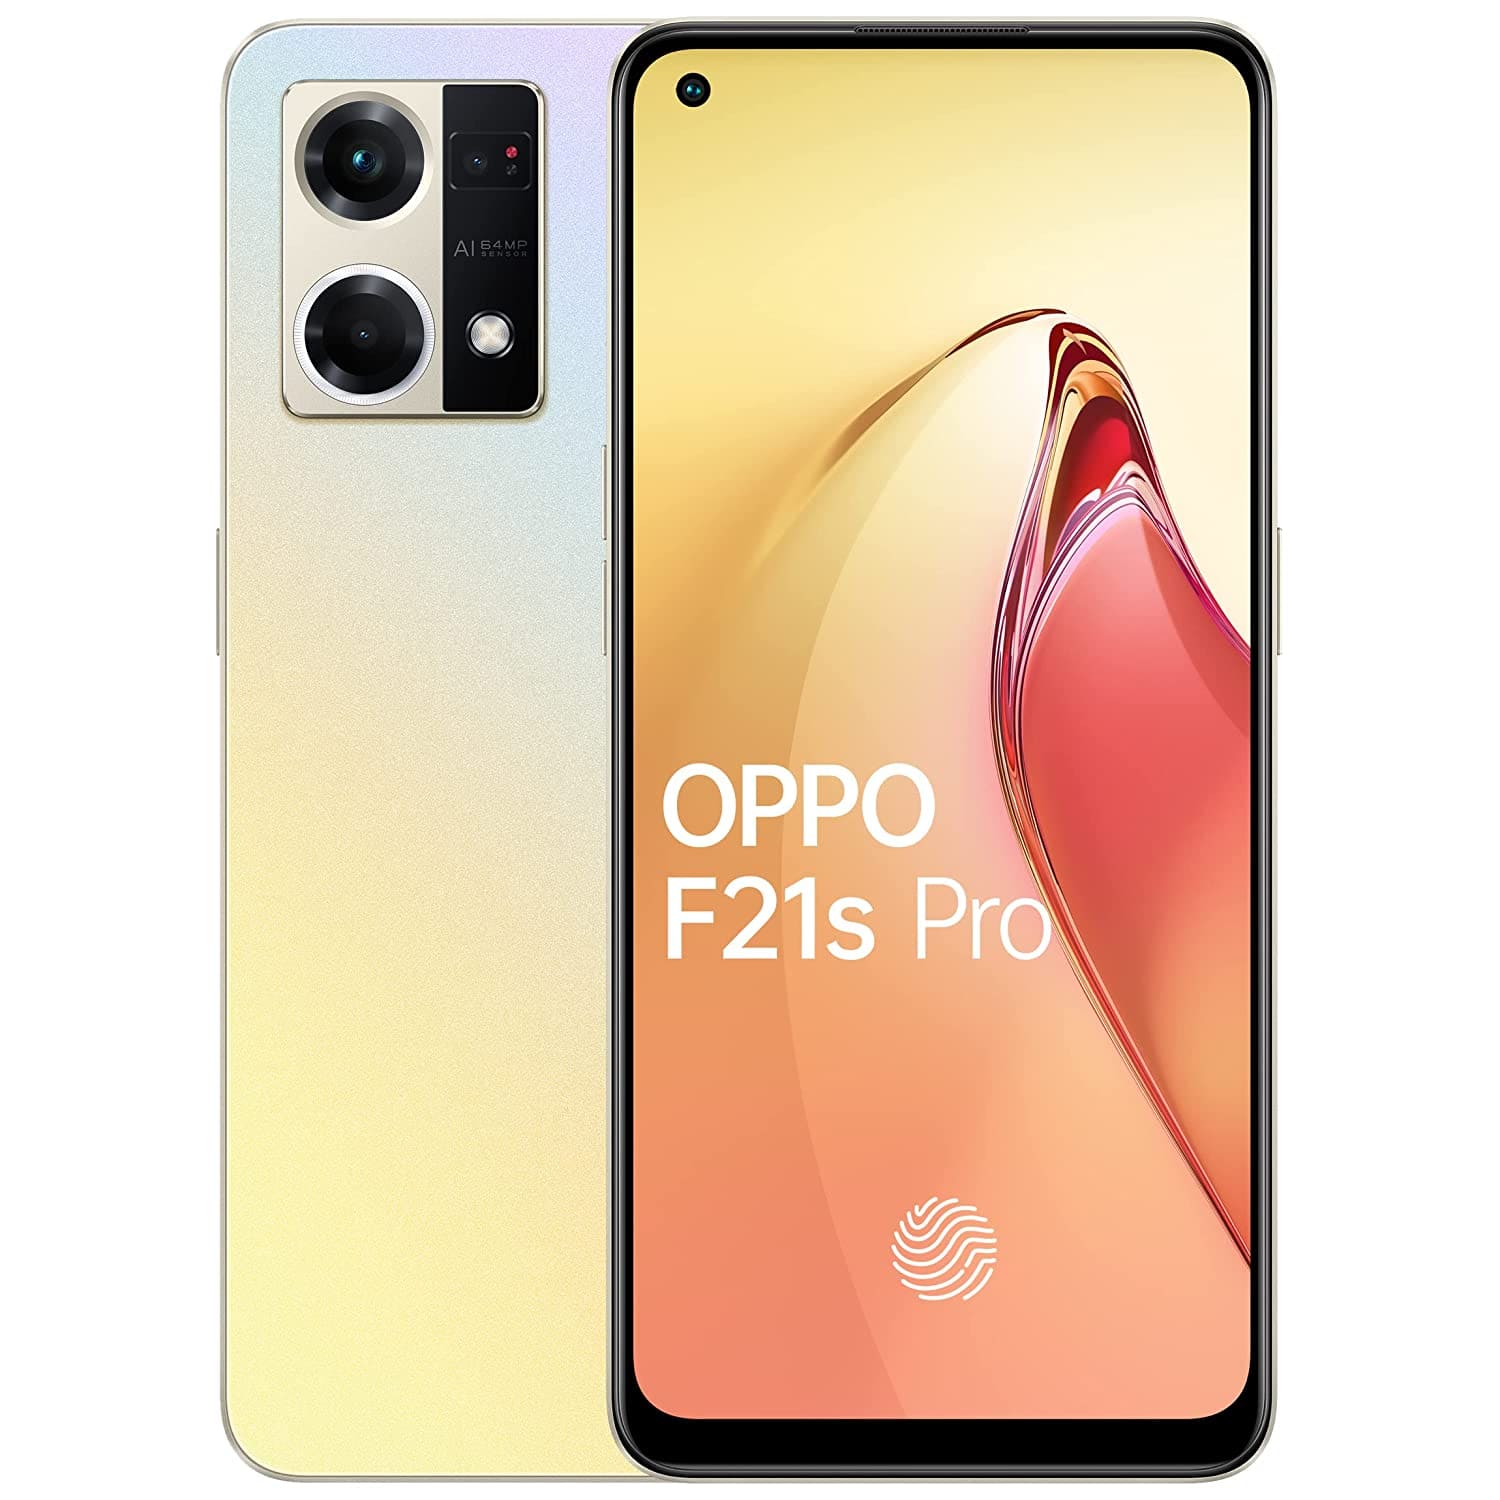 Oppo F21s Pro offers amazing features and specification at below 30000 price range